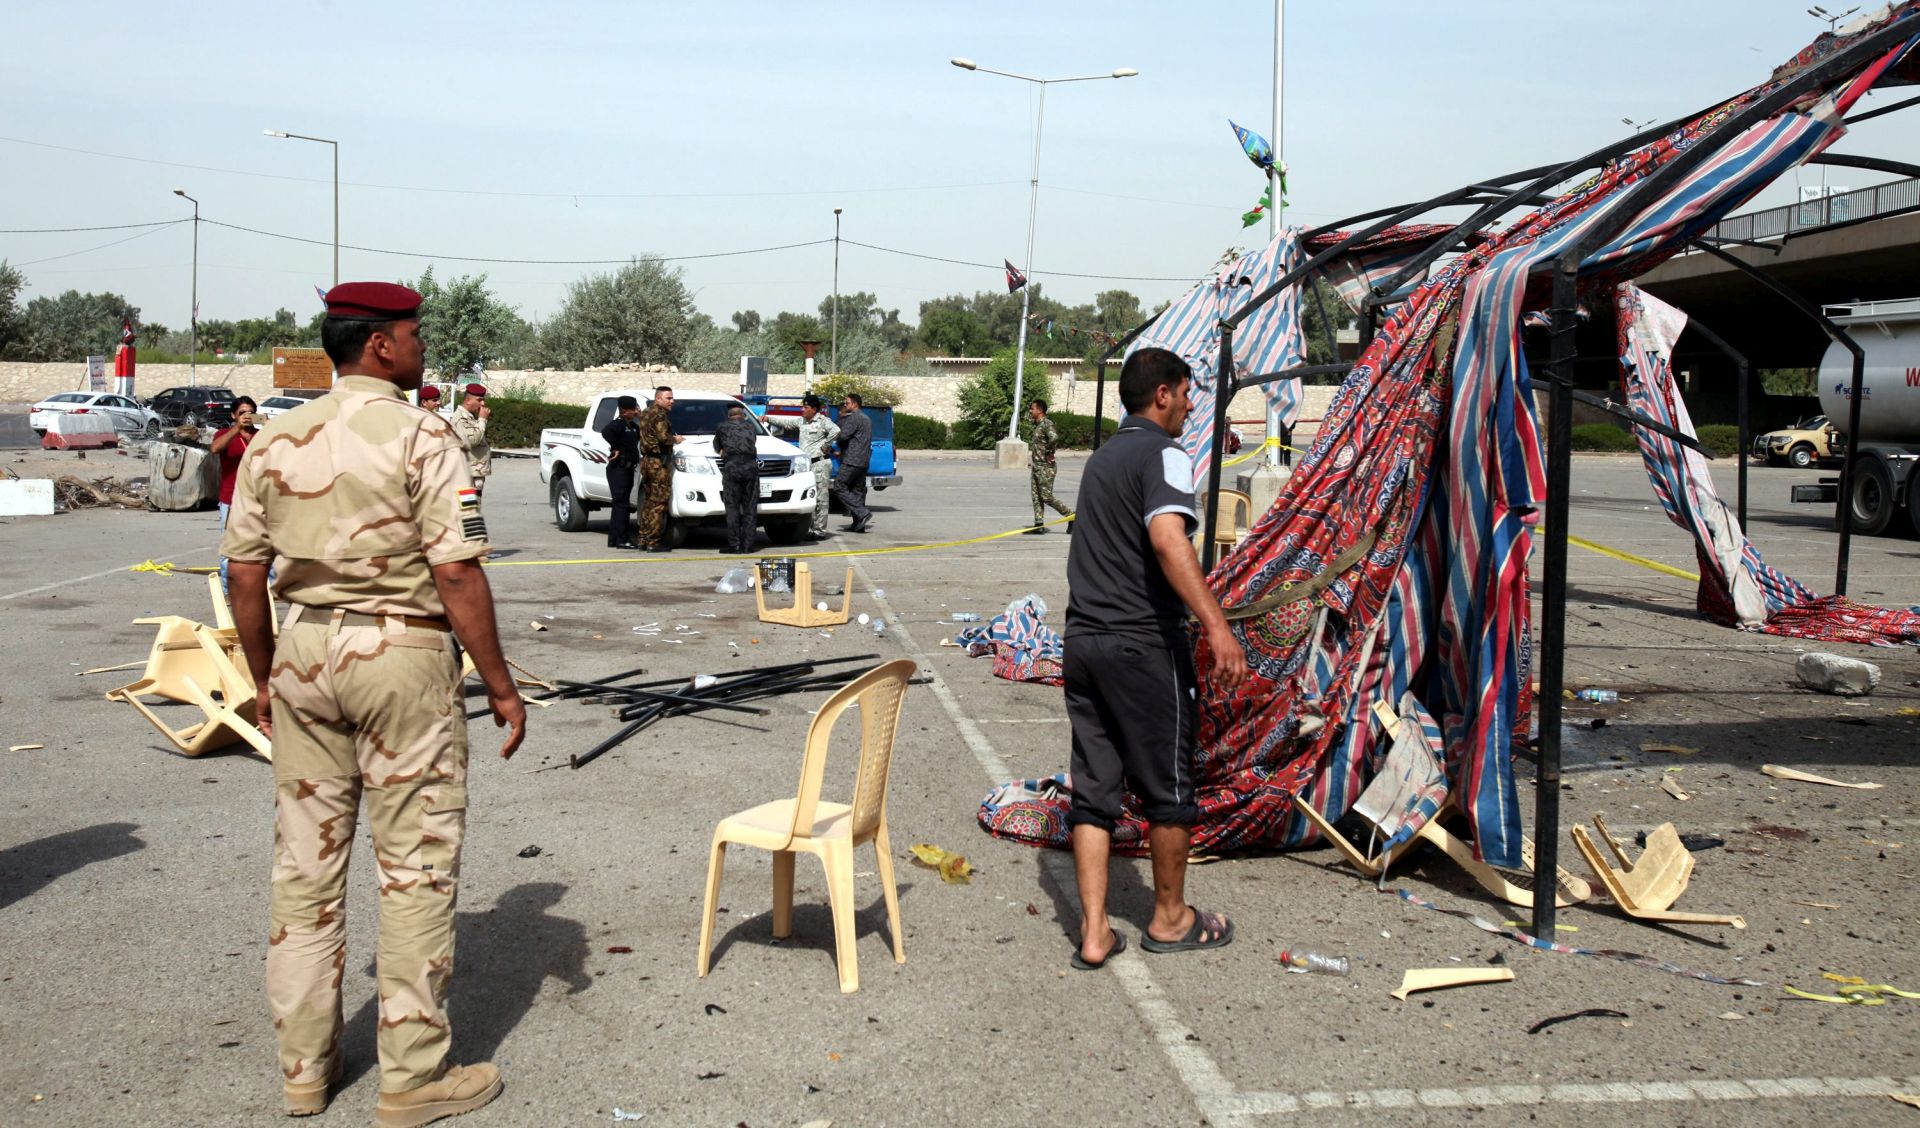 epa05587712 Iraqi policemen inspect the scene of a suicide bomb attack at Jadriyah district in central Baghdad, Iraq, 16 October 2016. At least four Shiites worshipers were killed and seven others were wounded when a suicide bomber blew himself inside a tent built to celebrate the annual Shiite Ashura festival in Baghdad, security officials said.  EPA/ALI ABBAS